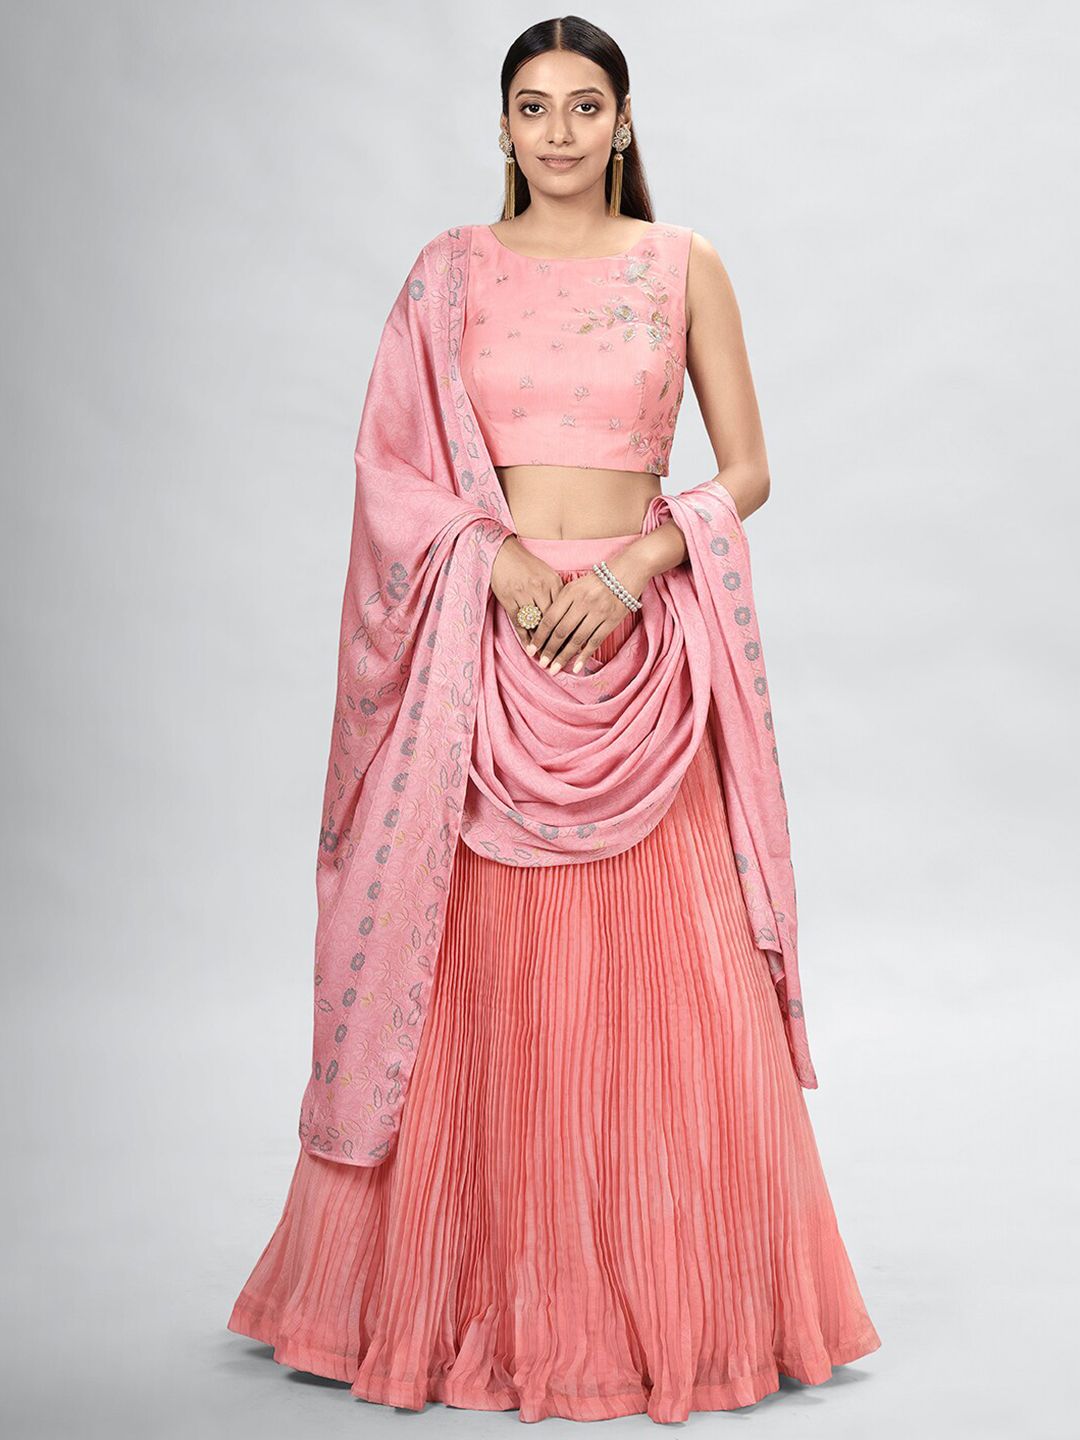 DRESSTIVE Pink & Grey Embroidered Semi-Stitched Lehenga & Unstitched Blouse With Dupatta Price in India